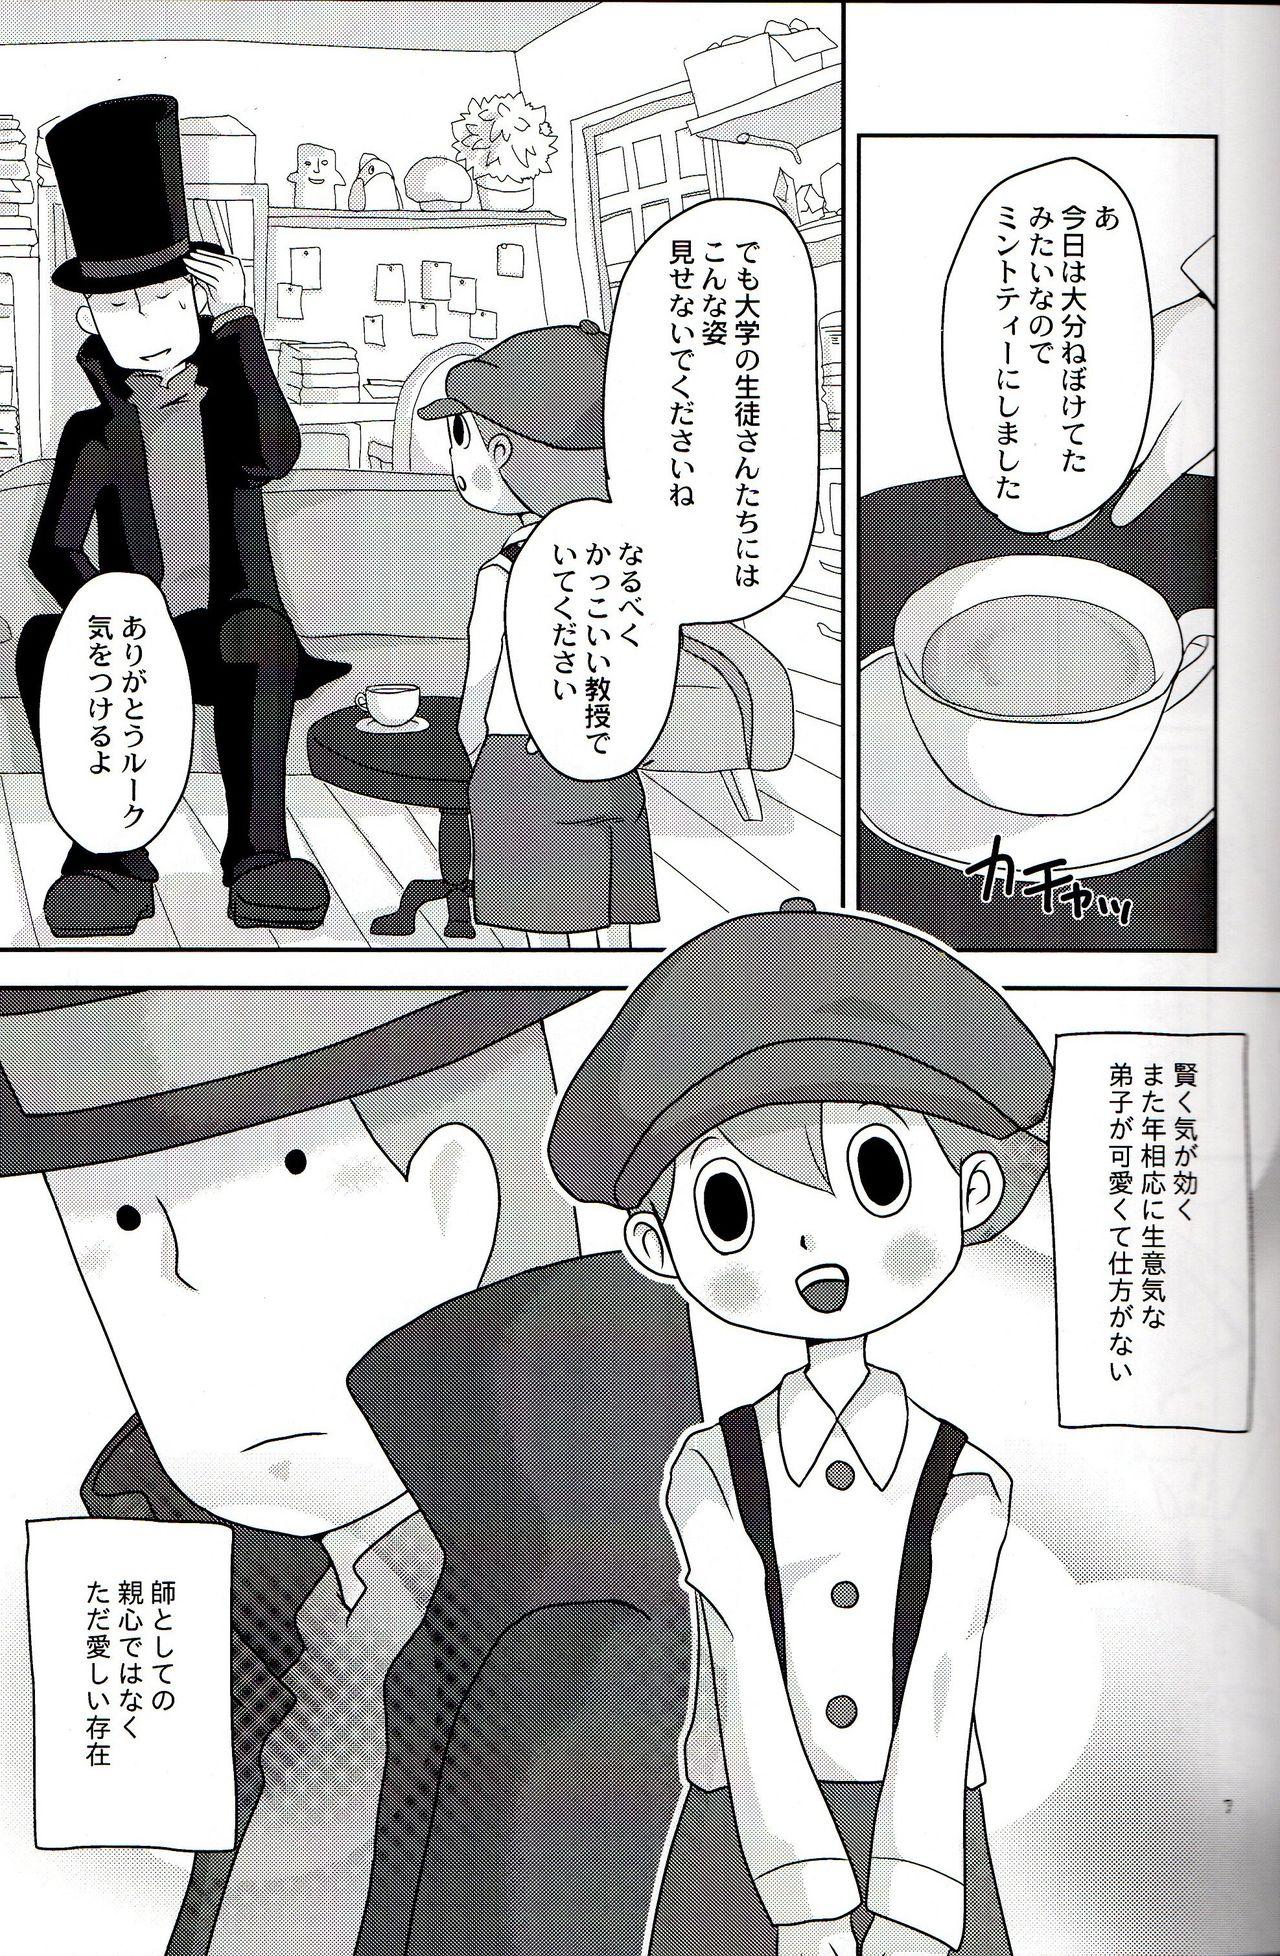 Belly DAYDREAM - Professor layton Brother - Page 9